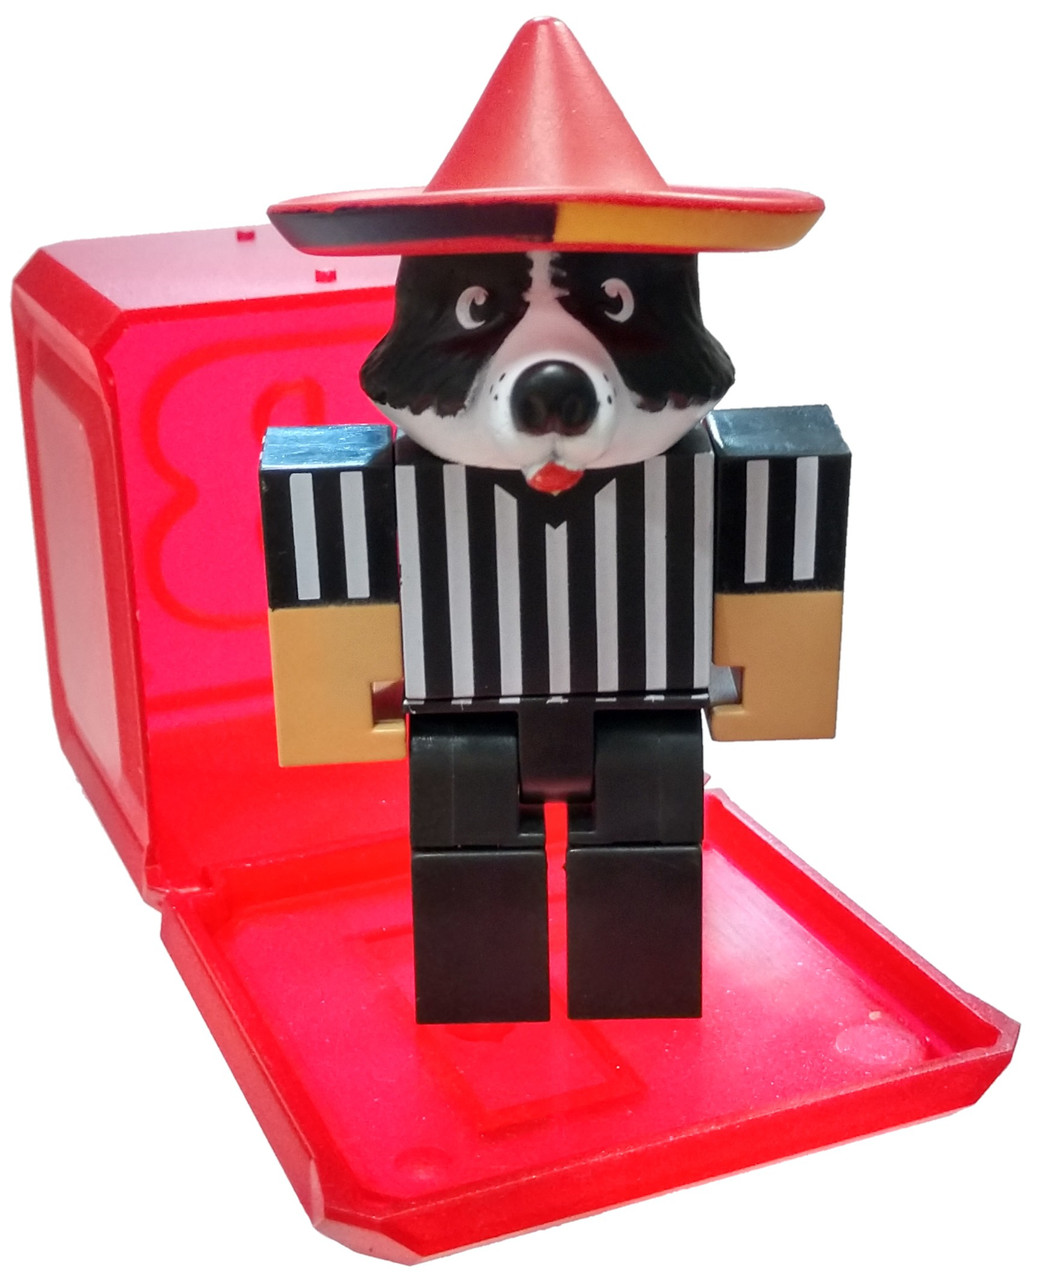 Roblox Celebrity Collection Series 5 High School Life Referee 3 Mini Figure With Red Cube And Online Code Loose Jazwares Toywiz - high school roblox 2 codes ice arm